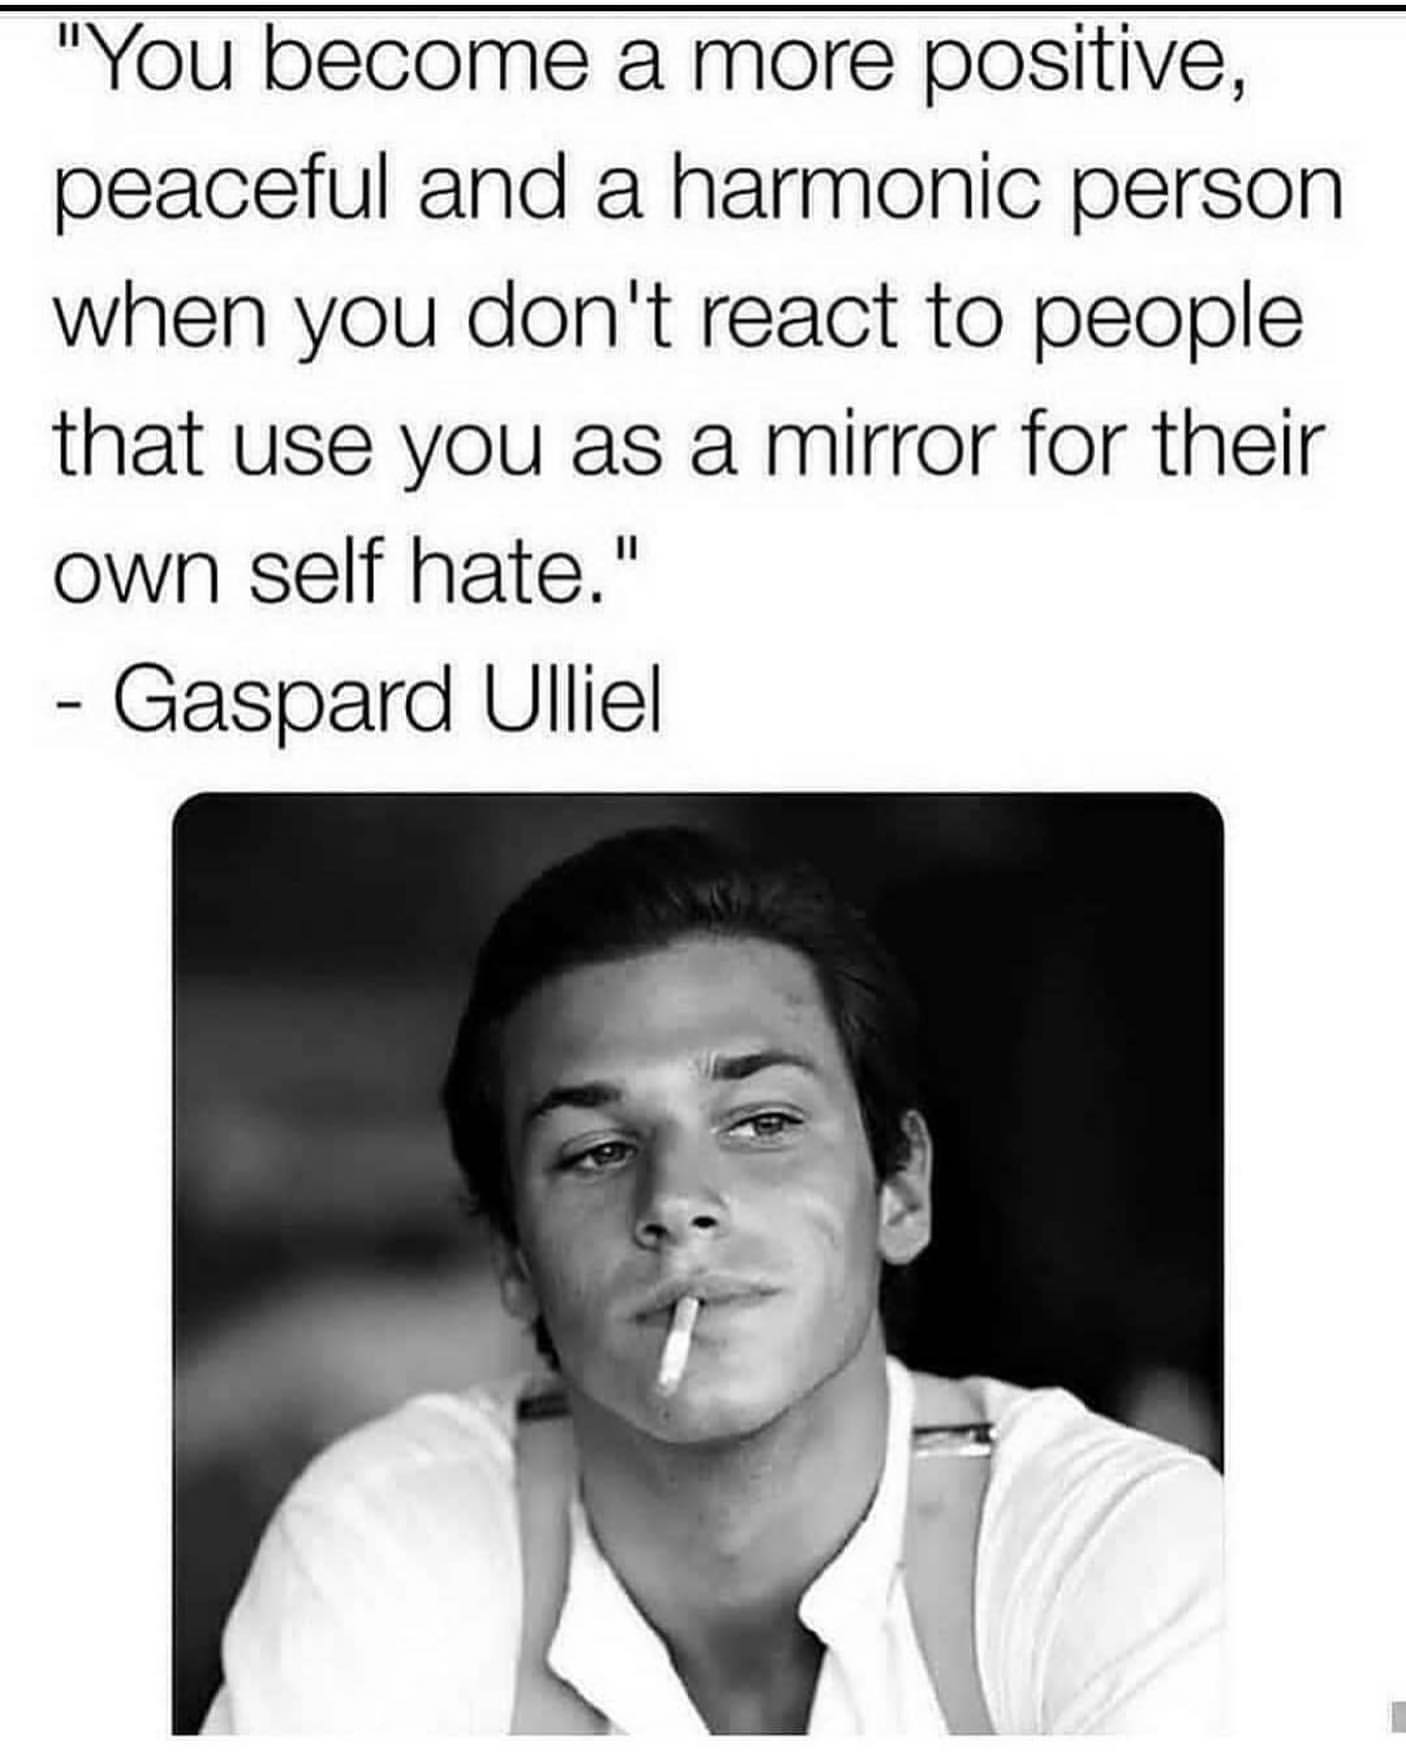 "You become a more positive, peaceful and a harmonic person when you don't react to people that use you as a mirror for their own self hate." Gaspard Ulliel.